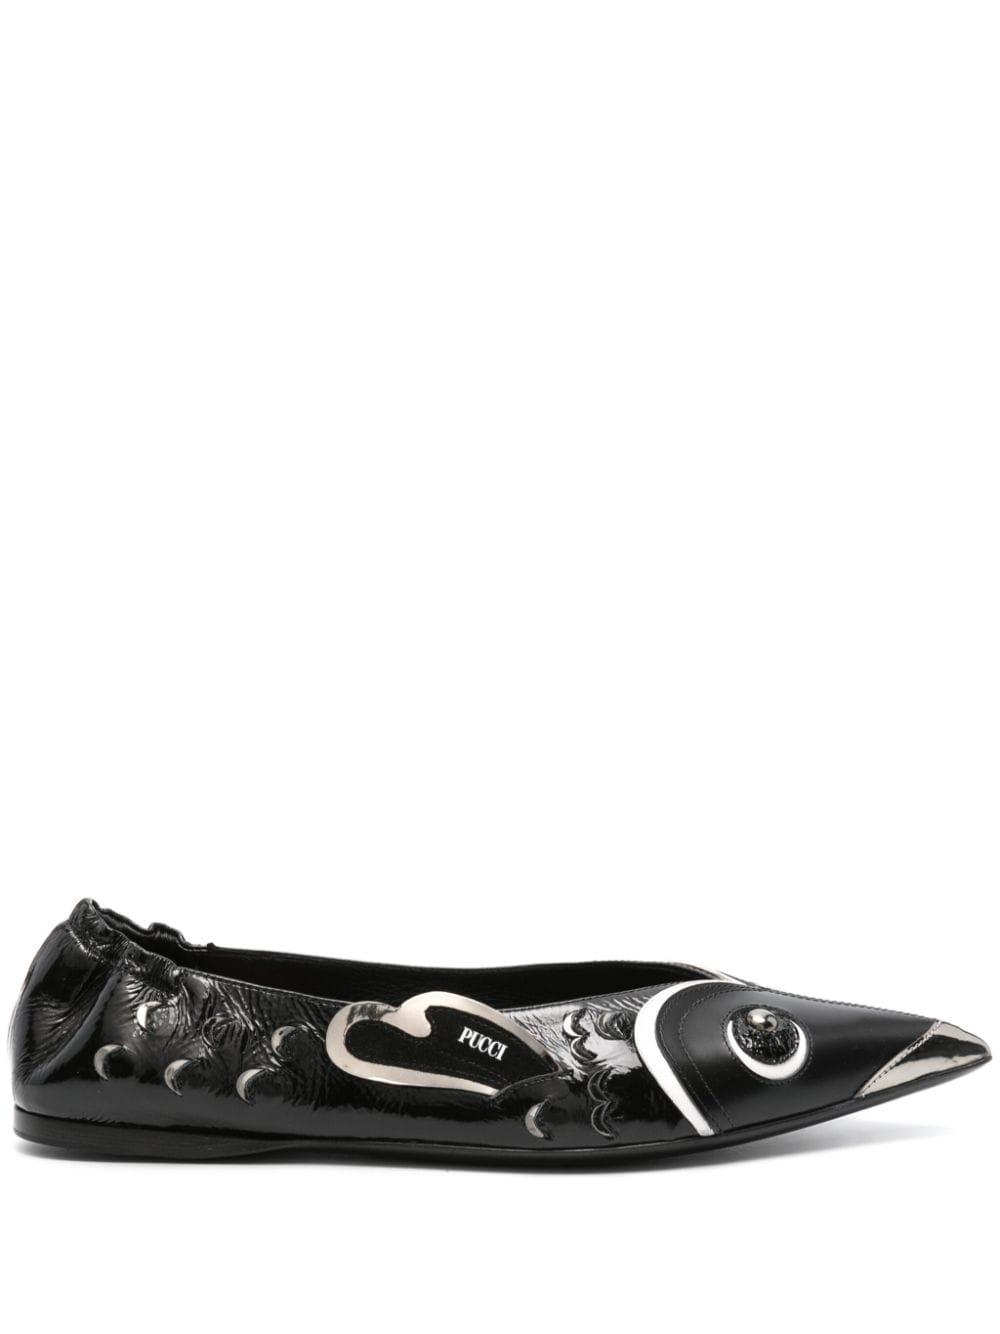 Pucci Me Leather Ballerina Shoes Black Lyst UK